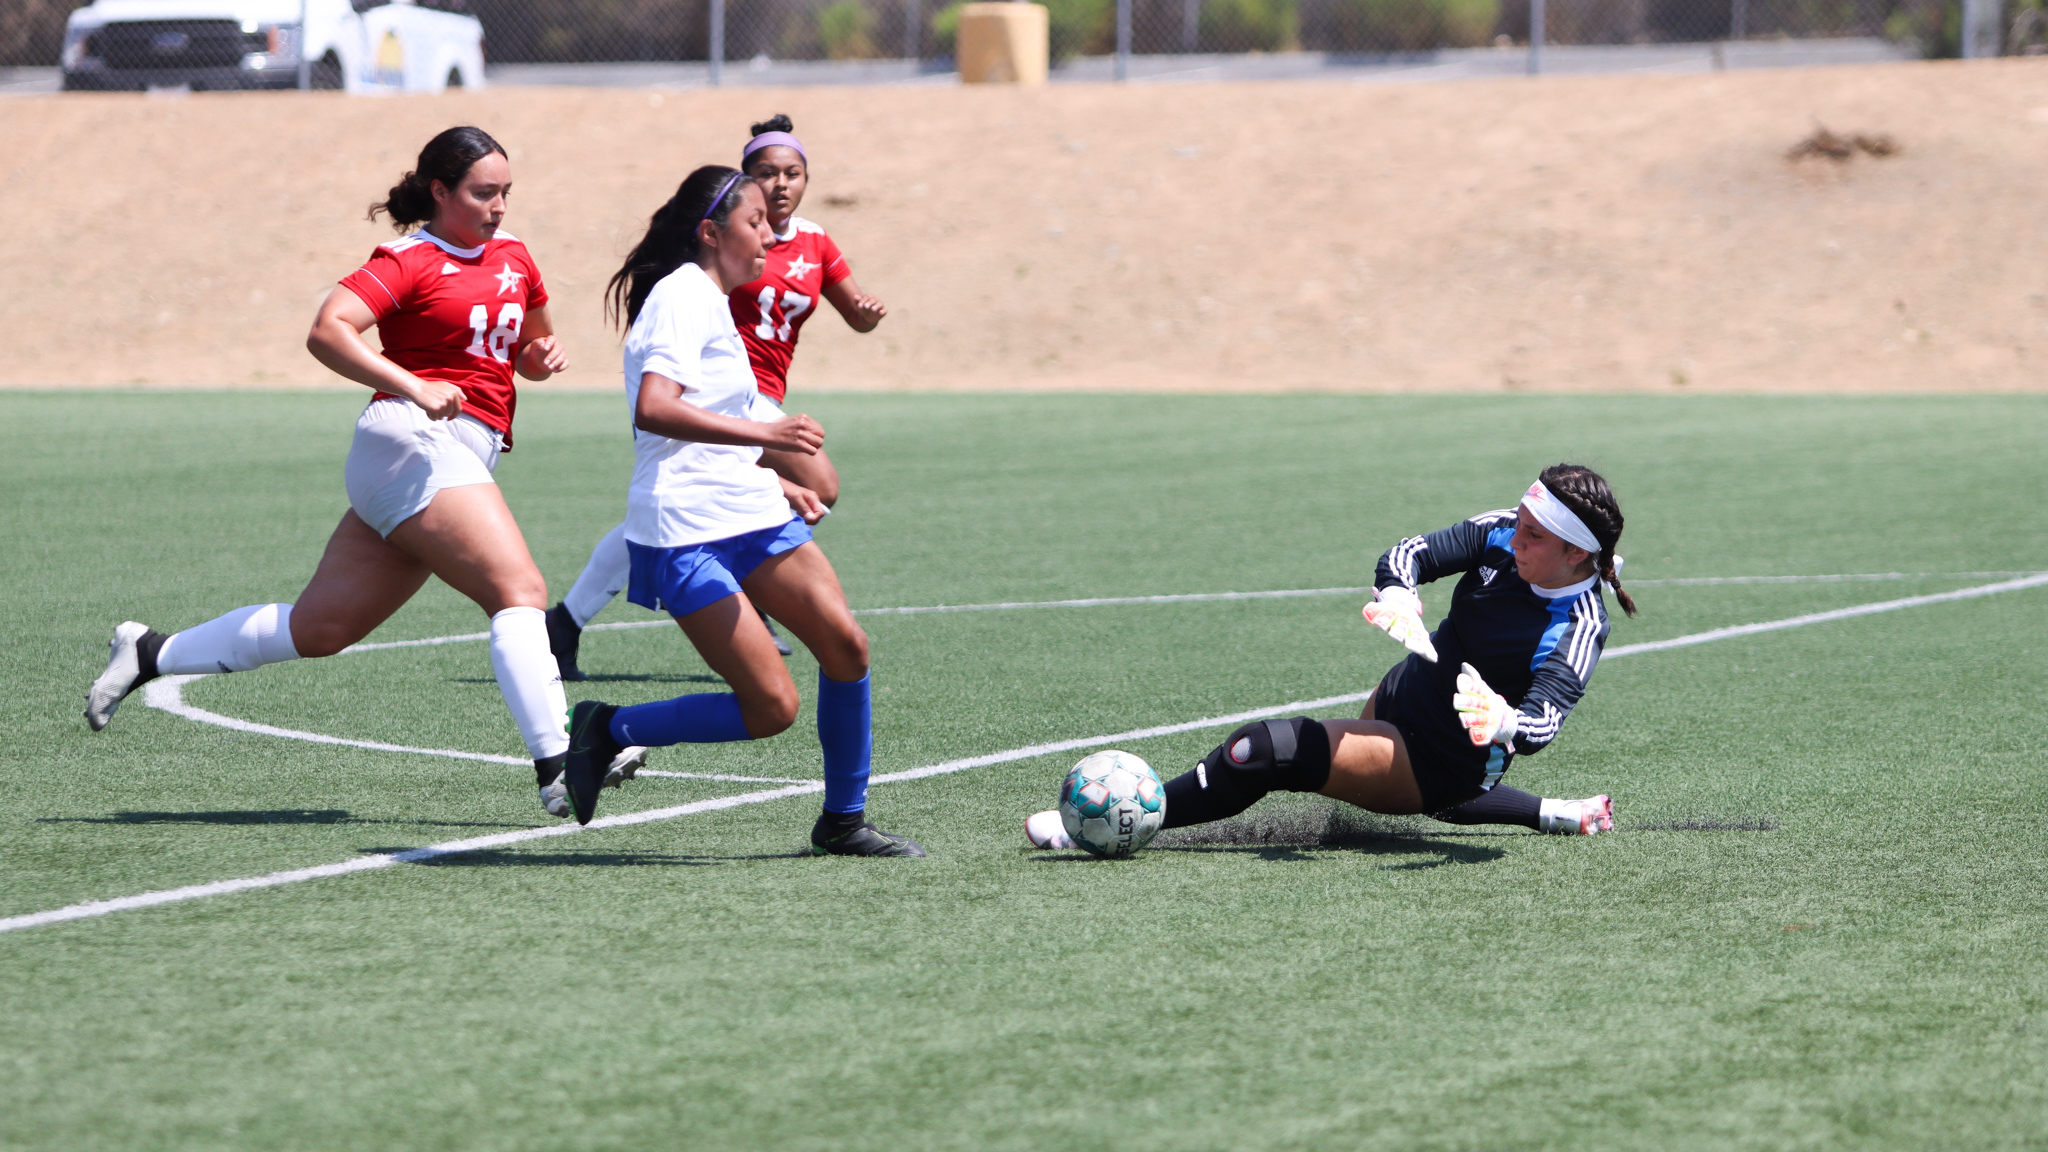 Goalkeeper Sayra Gamboa saves a goal by L.A. City College in the first half. Photo by Cara Heise.